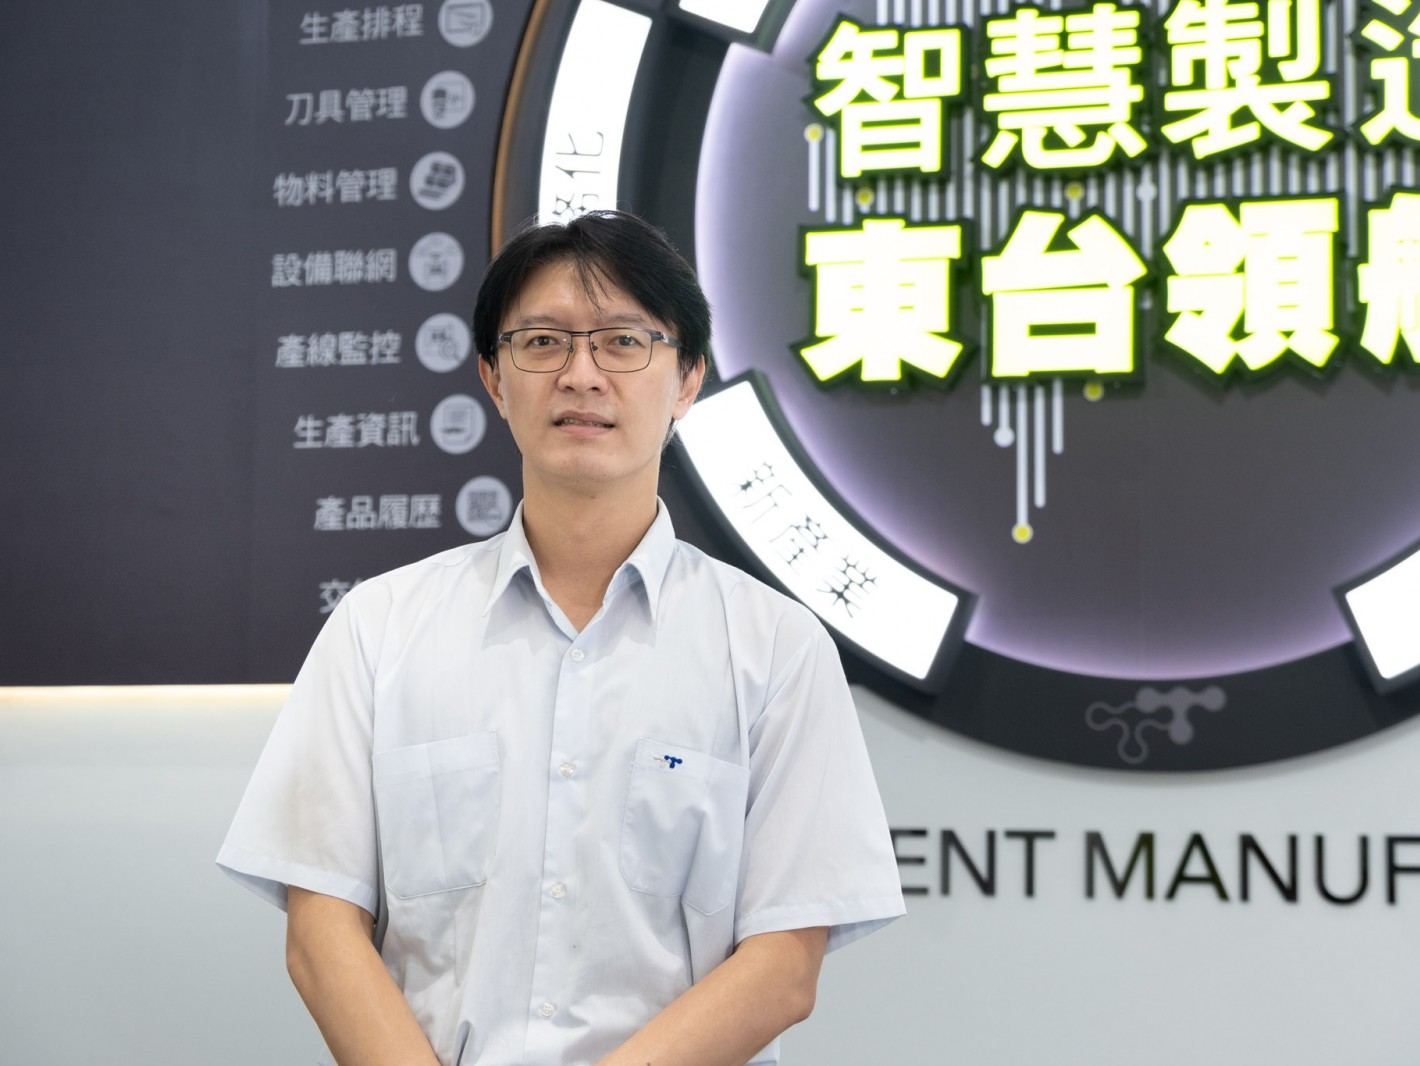 Mr. Jolly Wu, Sales Assisted Manager from Tongtai, focused on the topic of “Make a Move to Intelligent Manufacturing”.